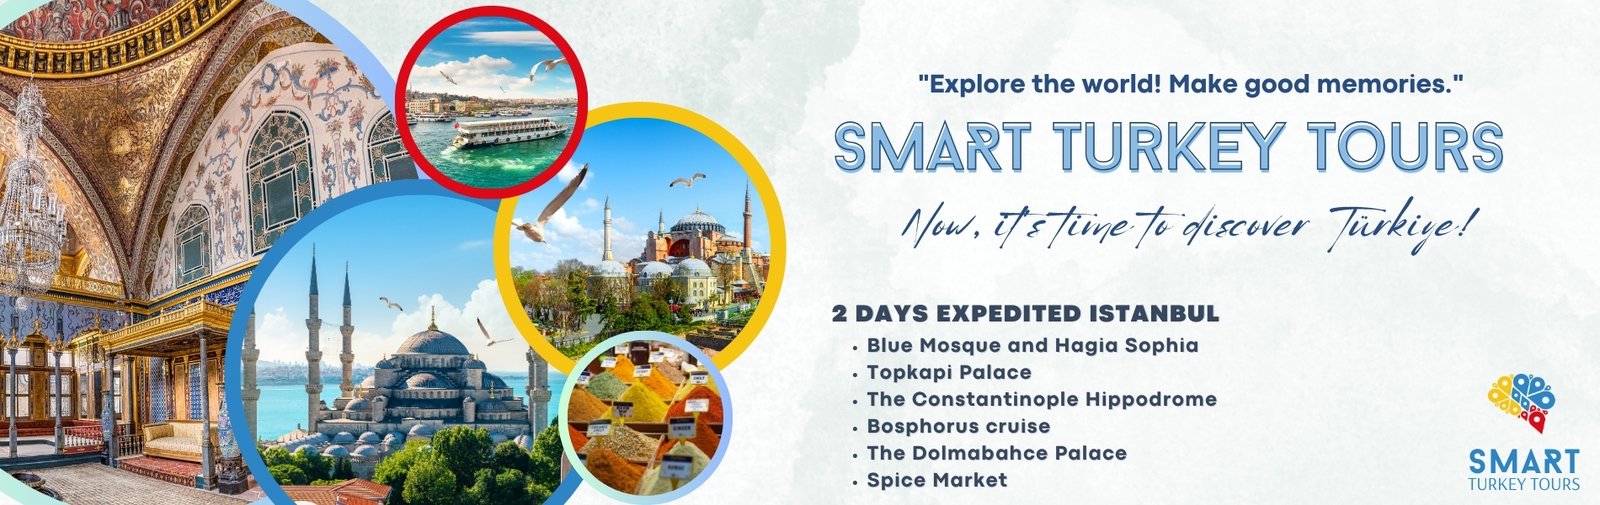 2 DAYS EXPEDITED ISTANBUL TOUR